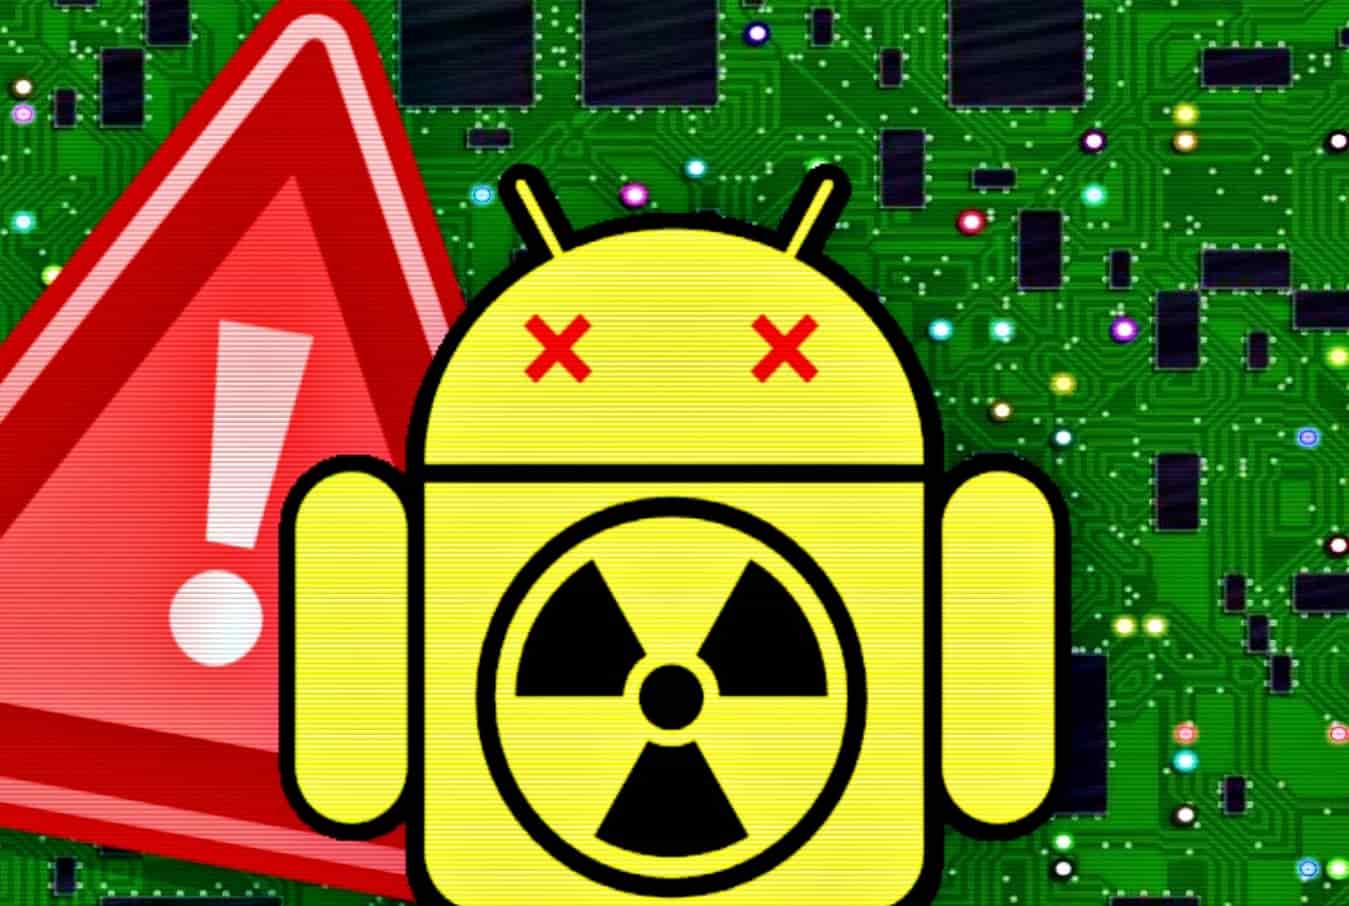 Android app with 1 billion users fails to fix flaws; exposed to malware